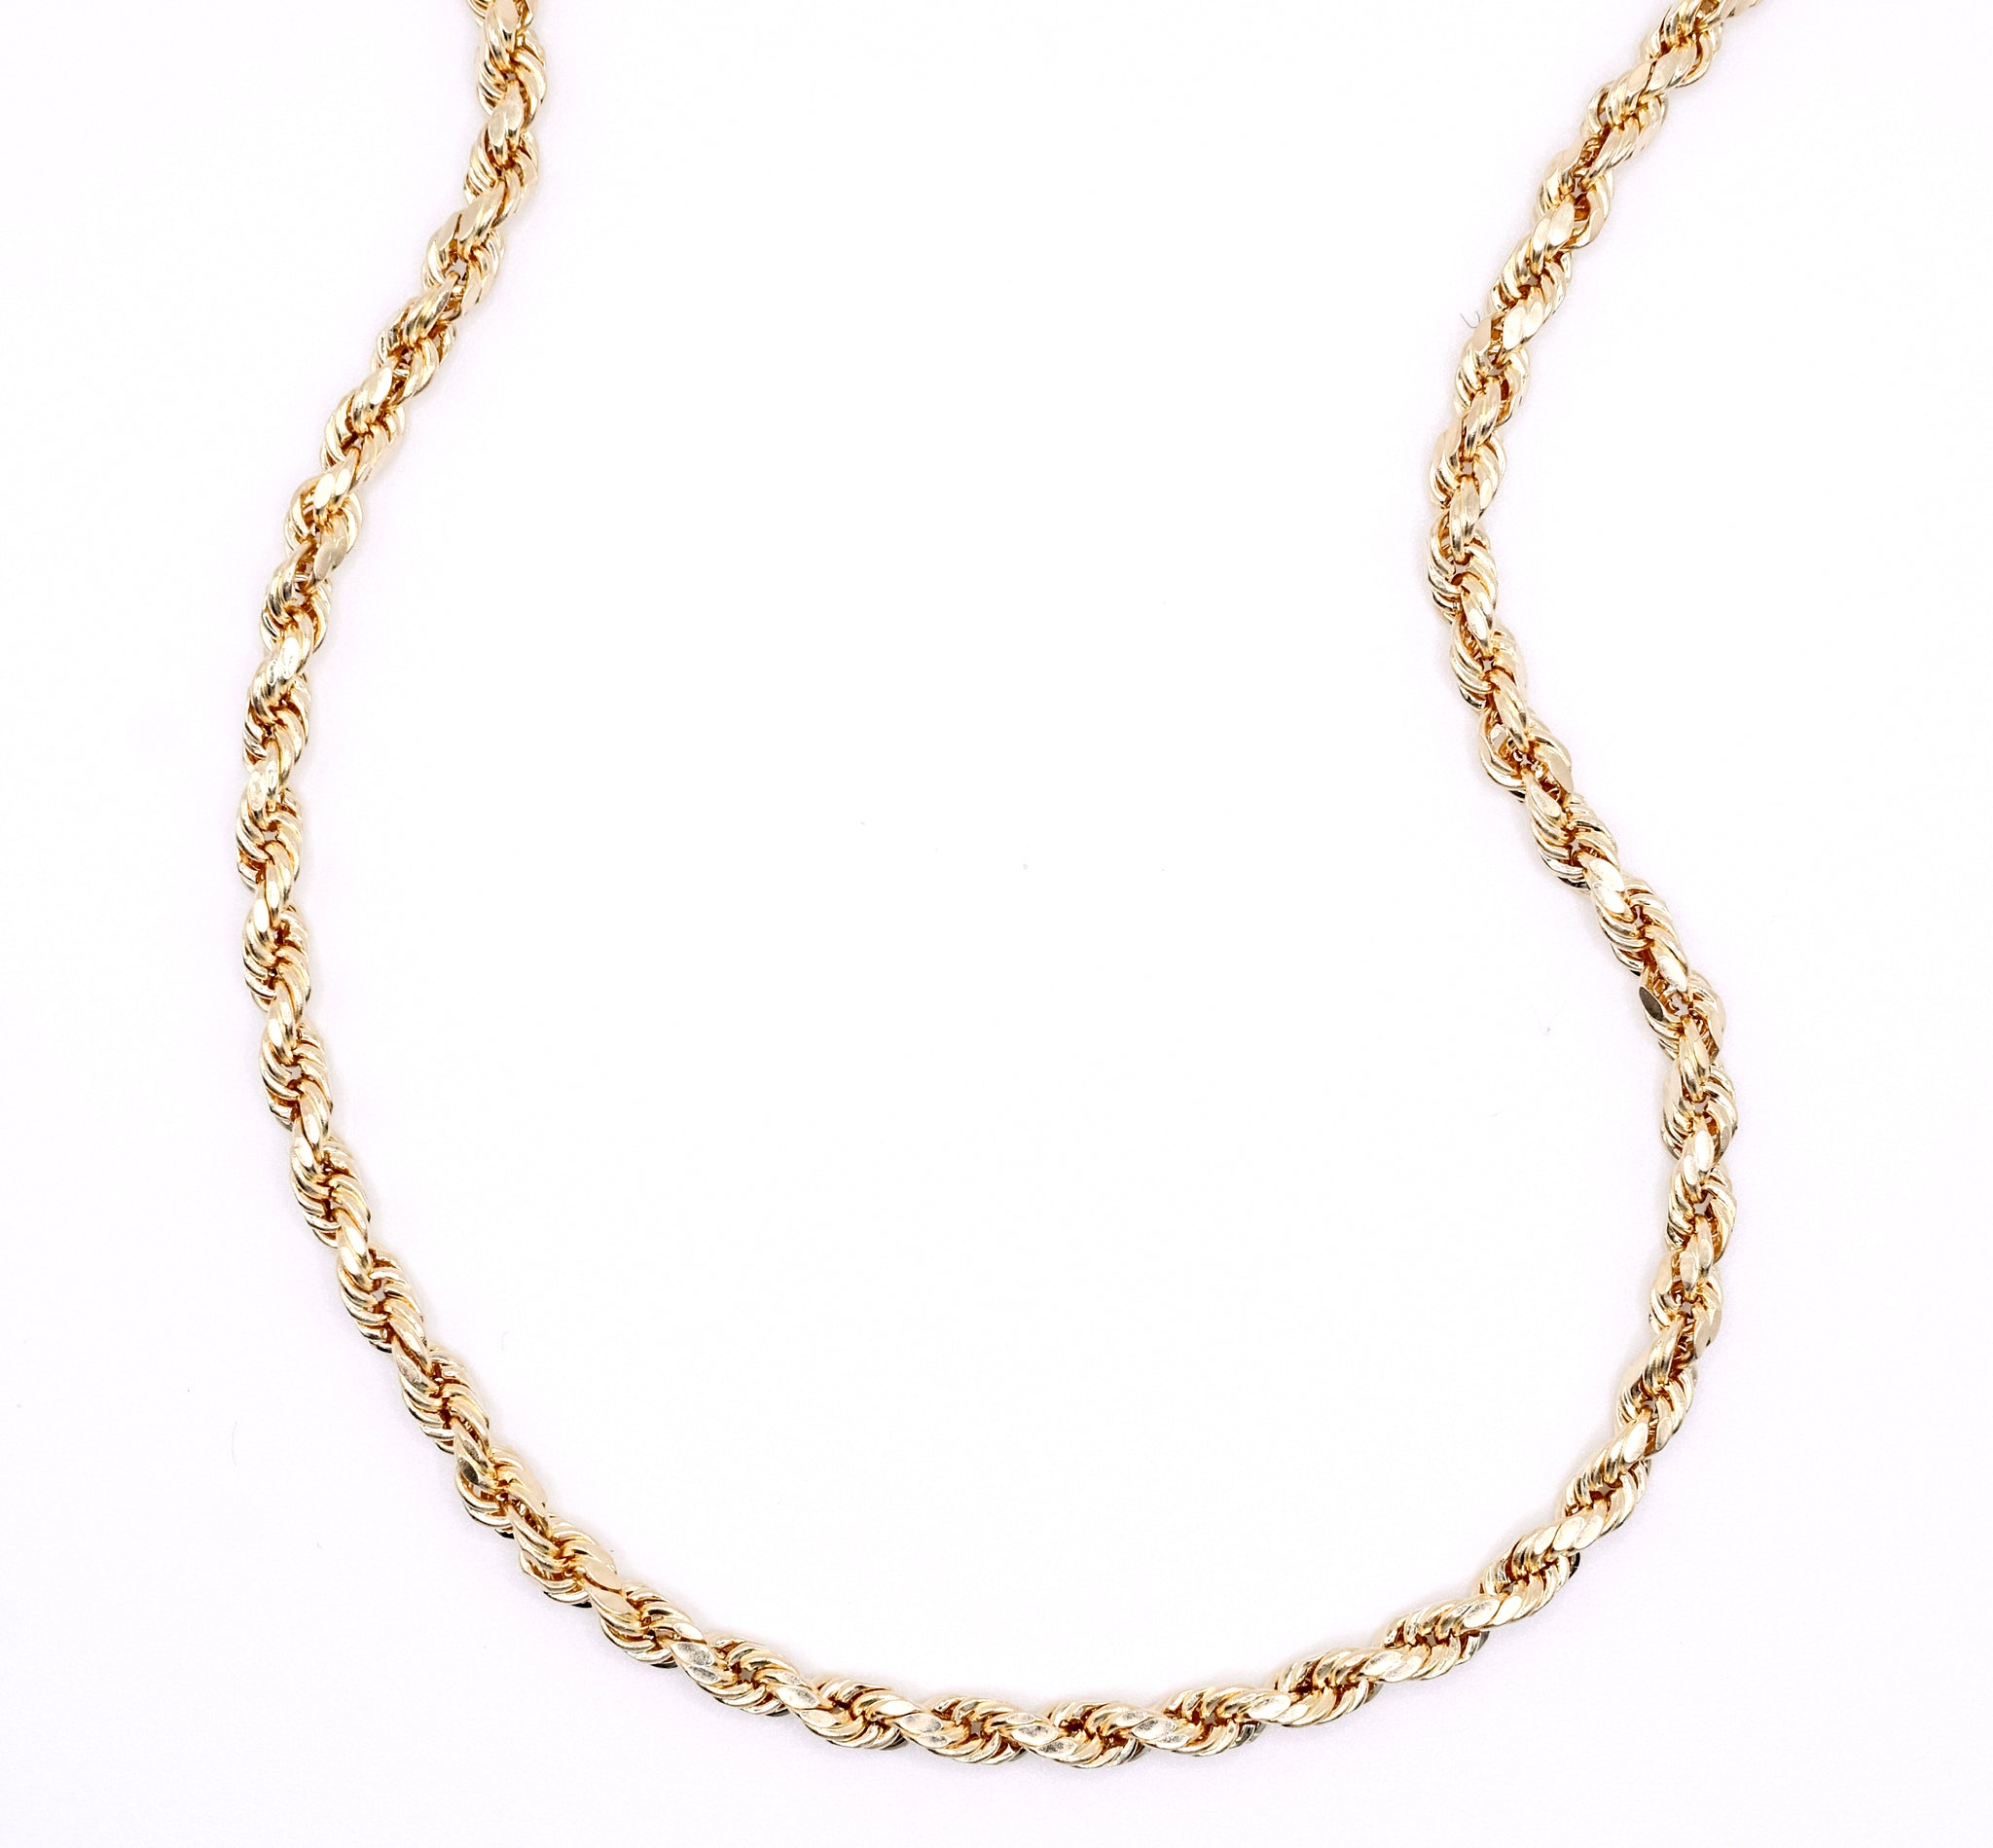 Rope Chain 22" 5mm - 14k